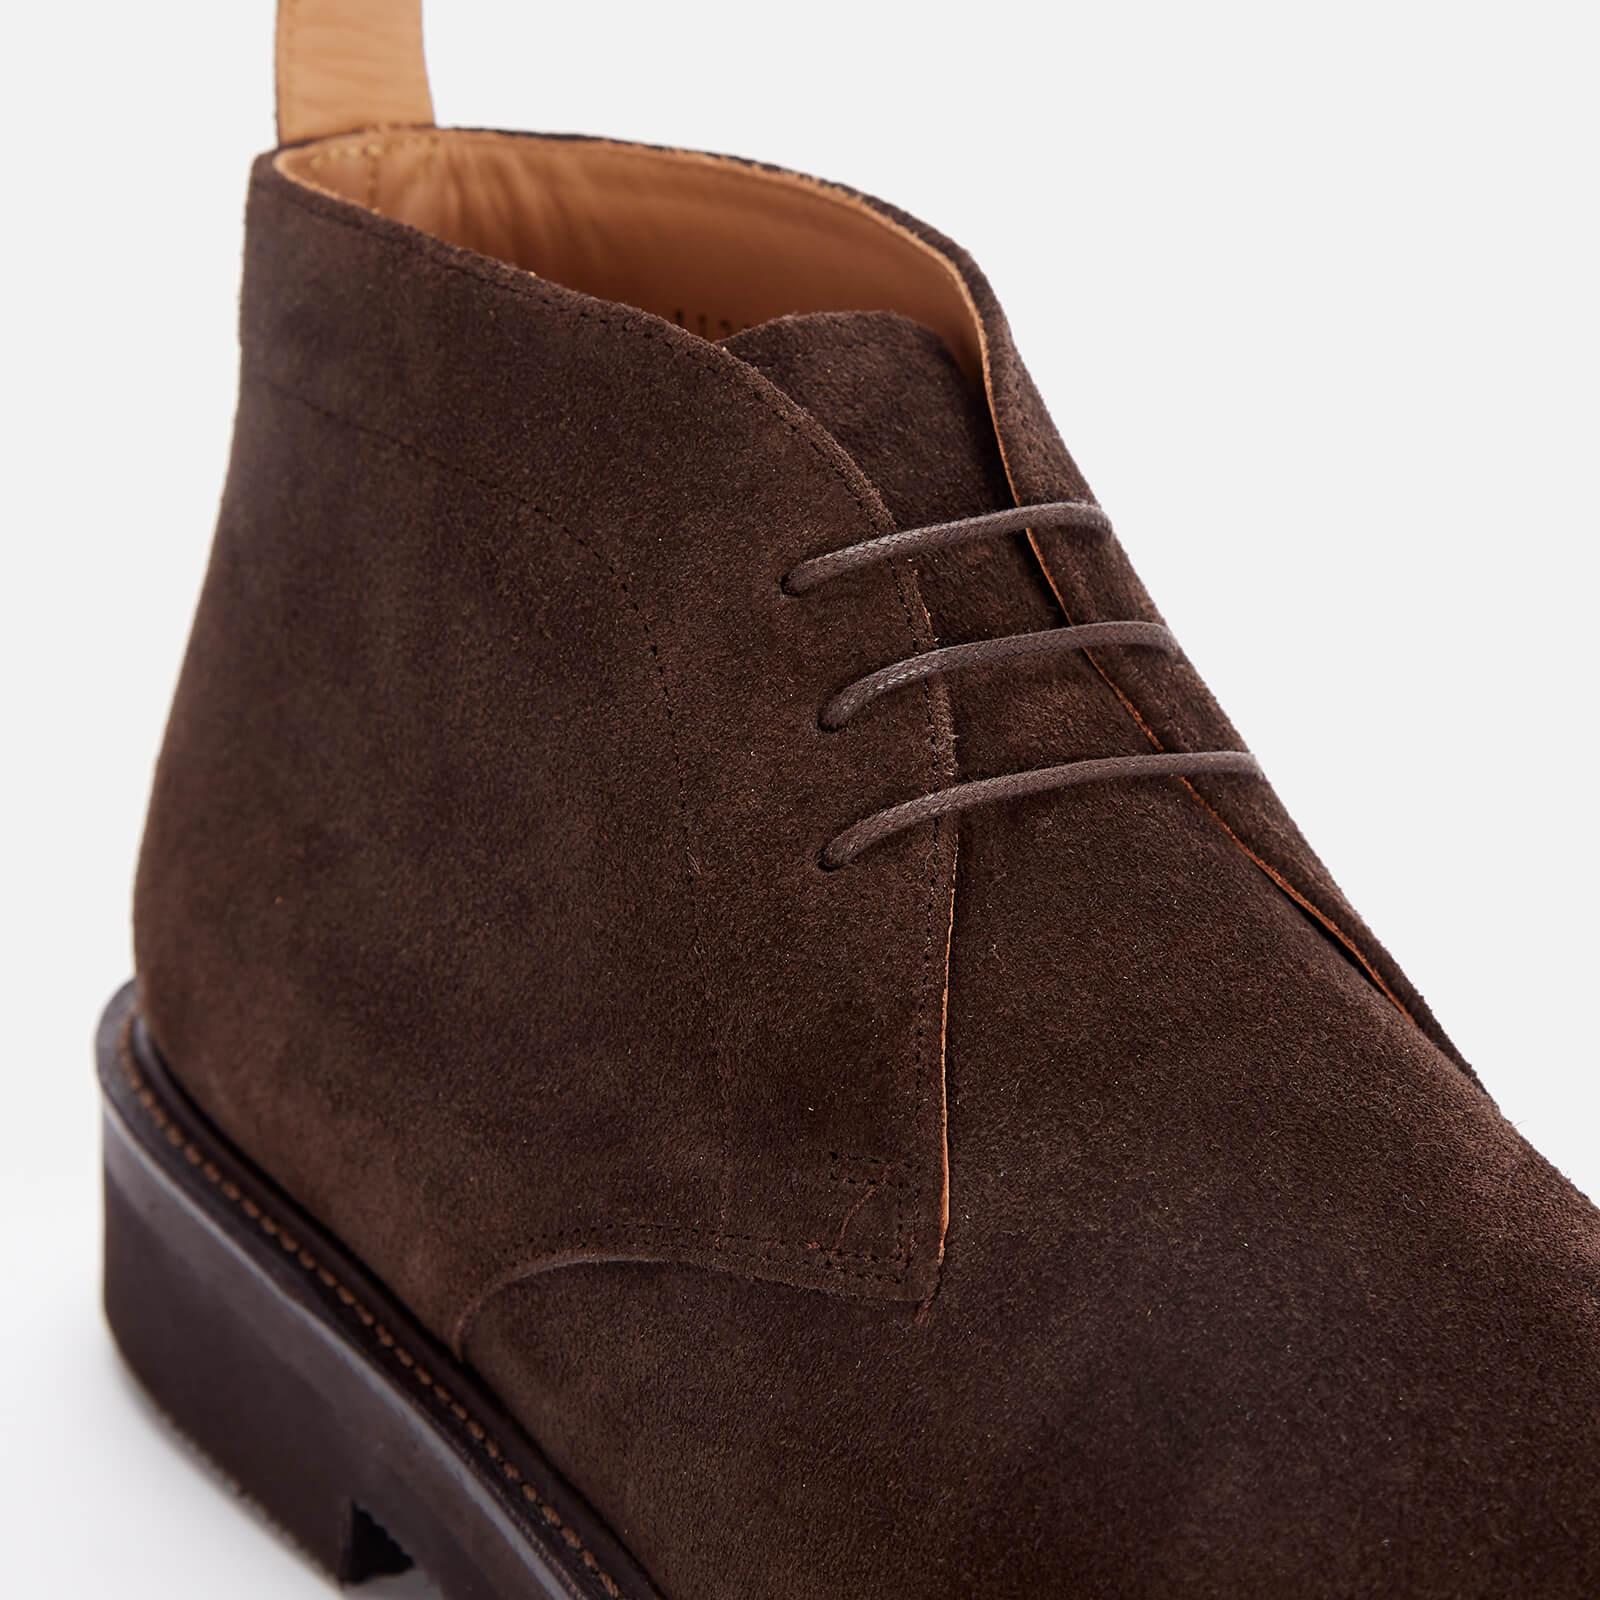 Grenson Clement Suede Desert Boots in Brown for Men - Lyst